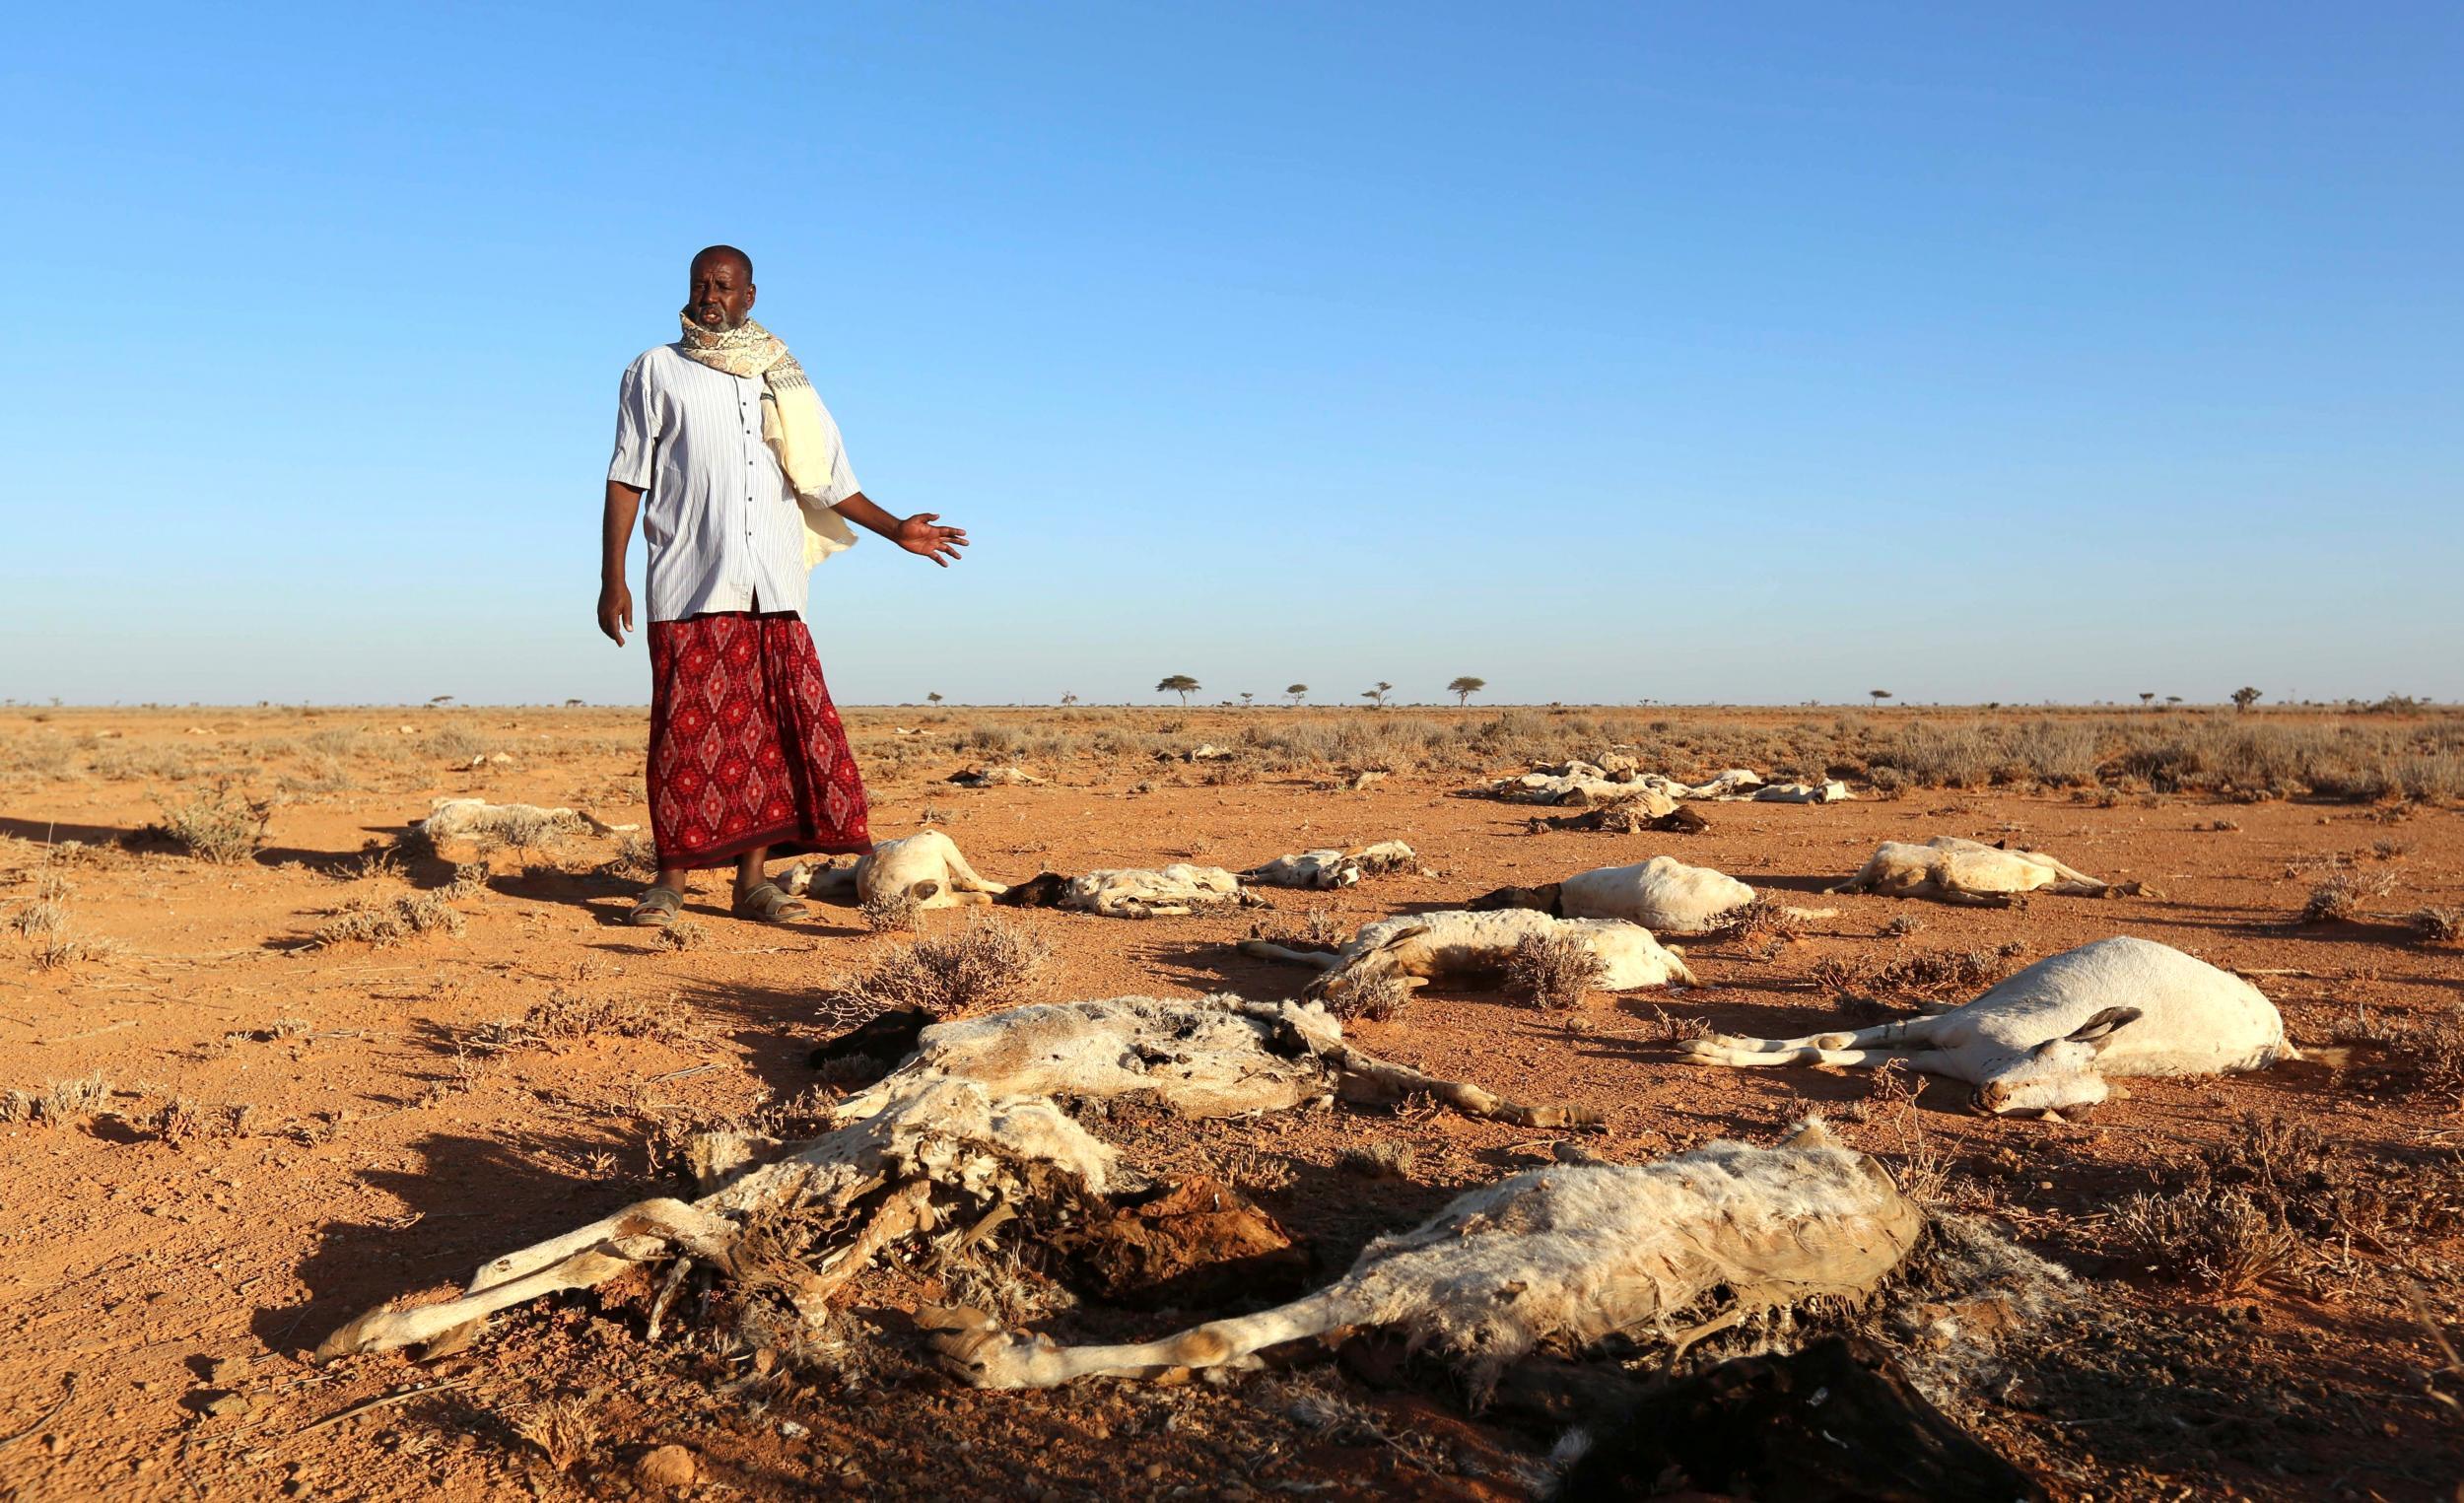 A Somali man, about to become a climate refugee within his own country, looks at the bodies of his sheep and goats near Dahar, Puntland, in December last year